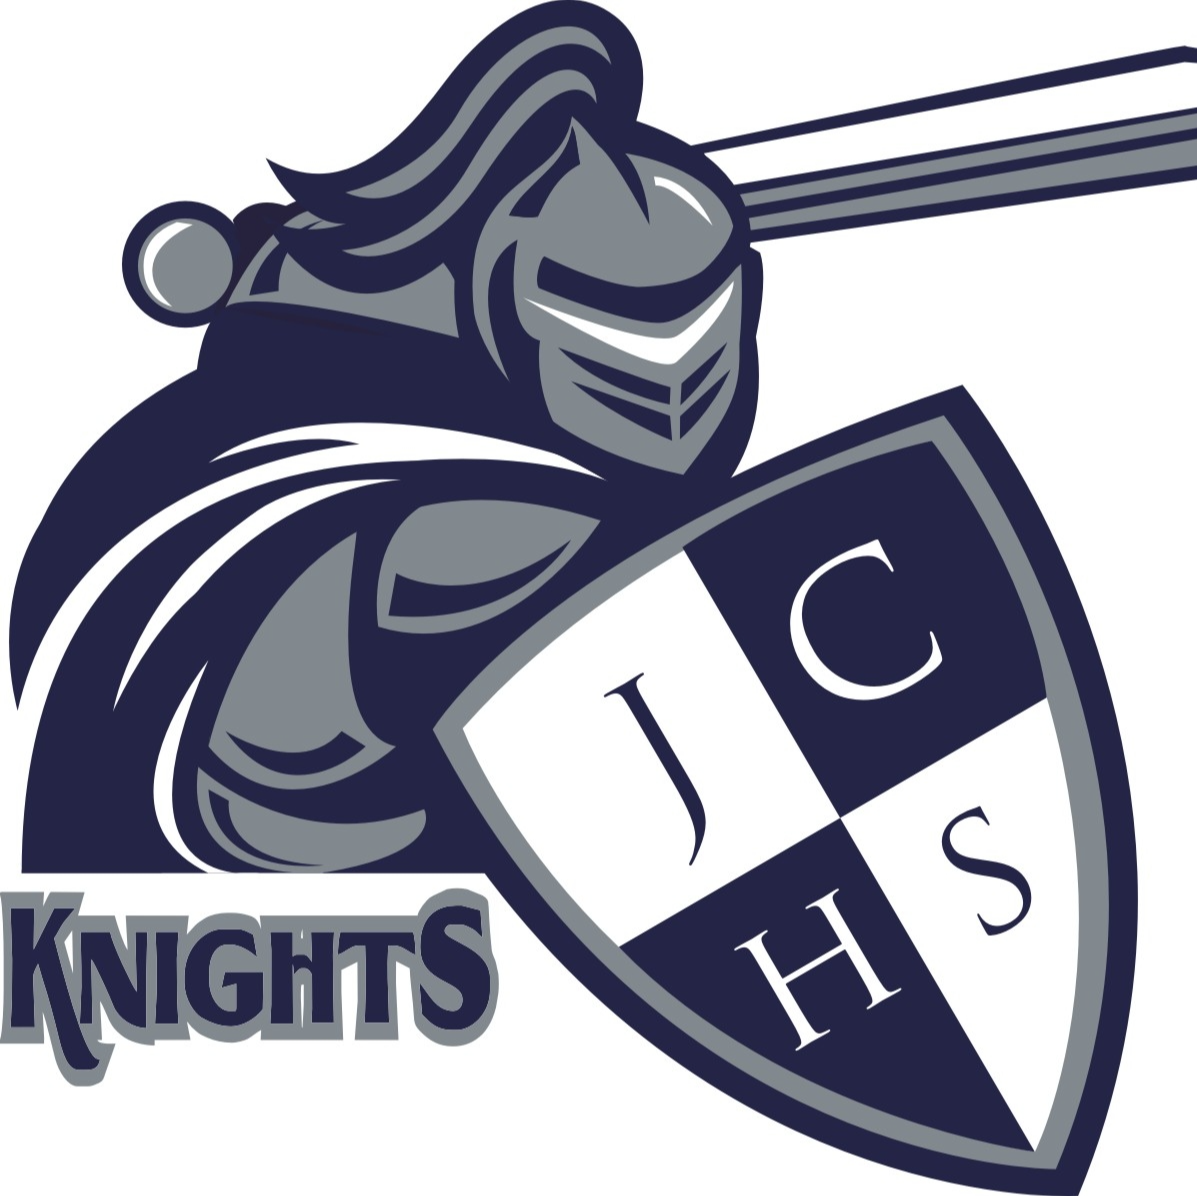 Picture of Champe's knight mascot holding a shield with letters JCHS in one hand and raising a sword in the other.